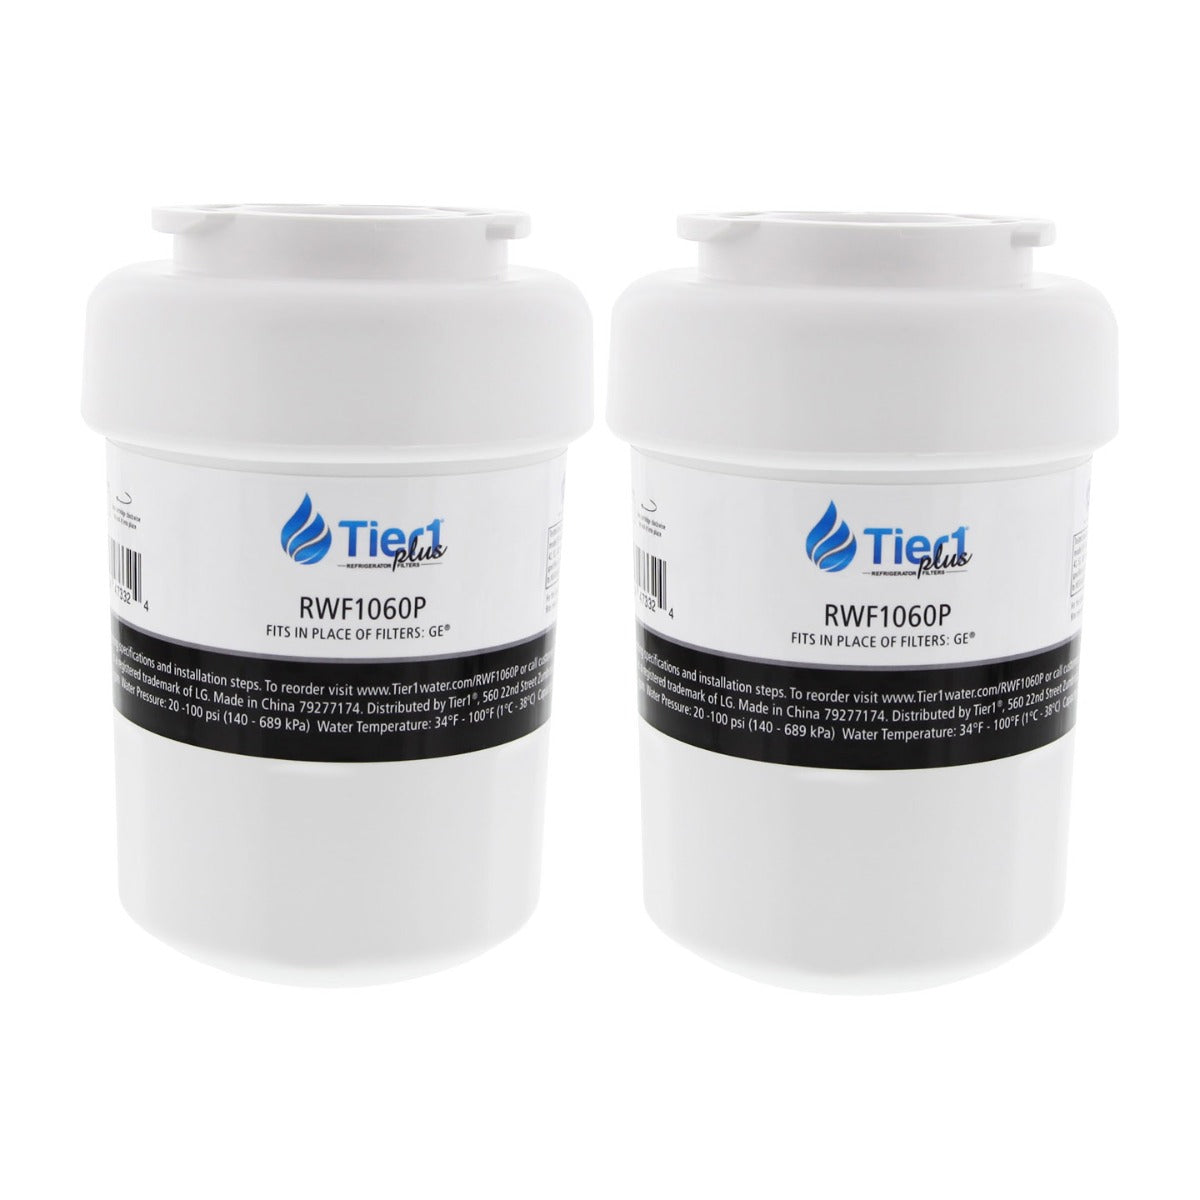 Tier1 Plus GE MWF Comparable Lead And Mercury Reducing Refrigerator Water Filter